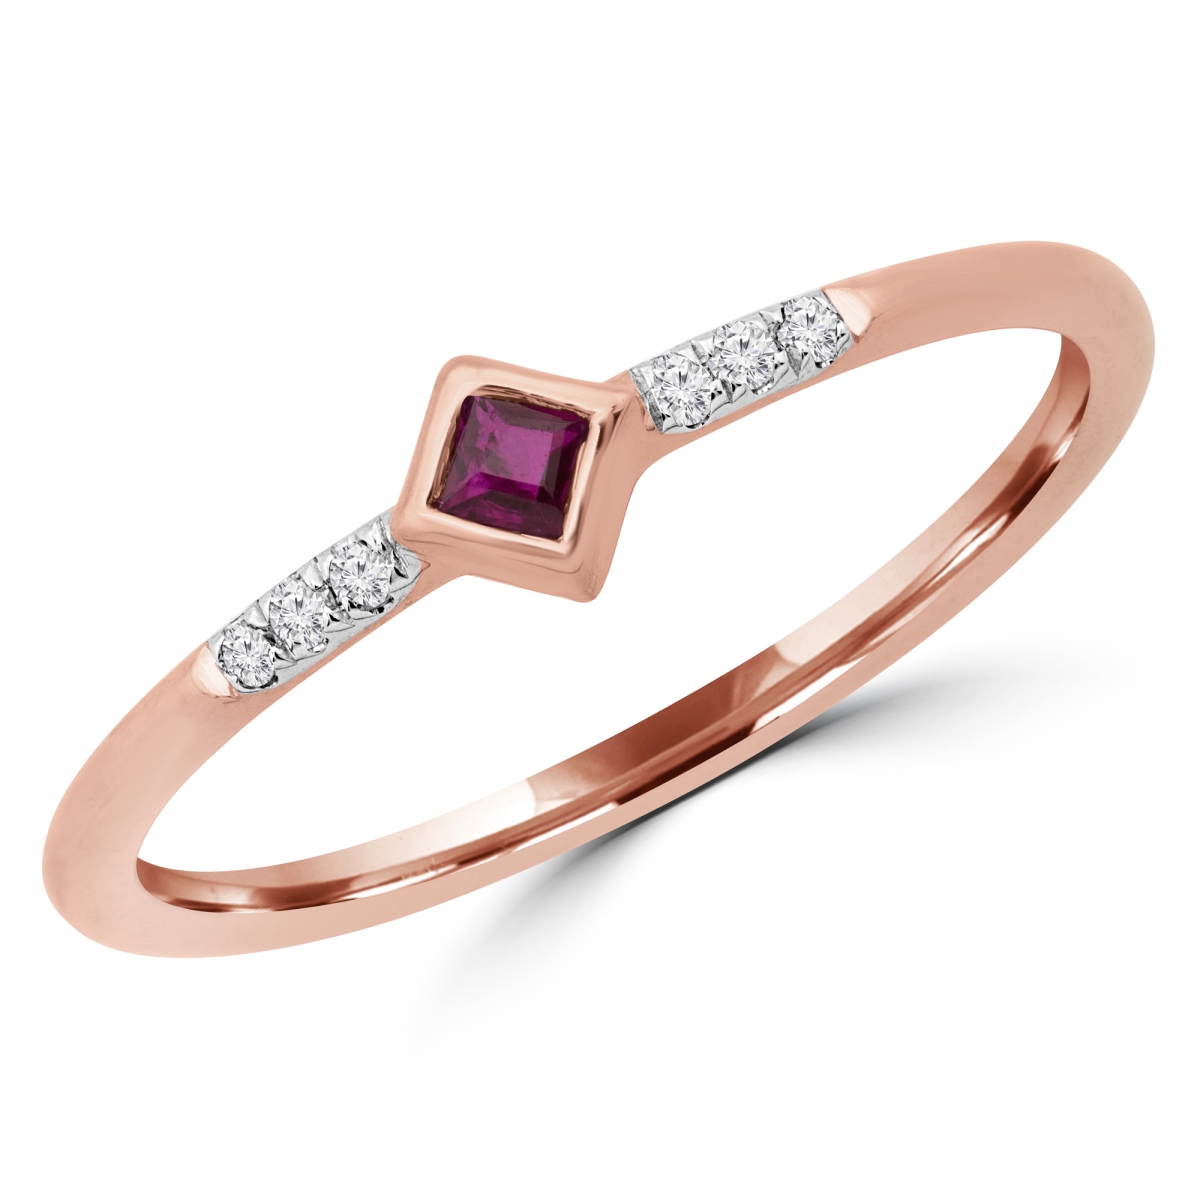 MDR190078-4.5 0.1 CTW Round Red Ruby Bezel Set Cocktail Ring in 14K Rose Gold - Size 4.5